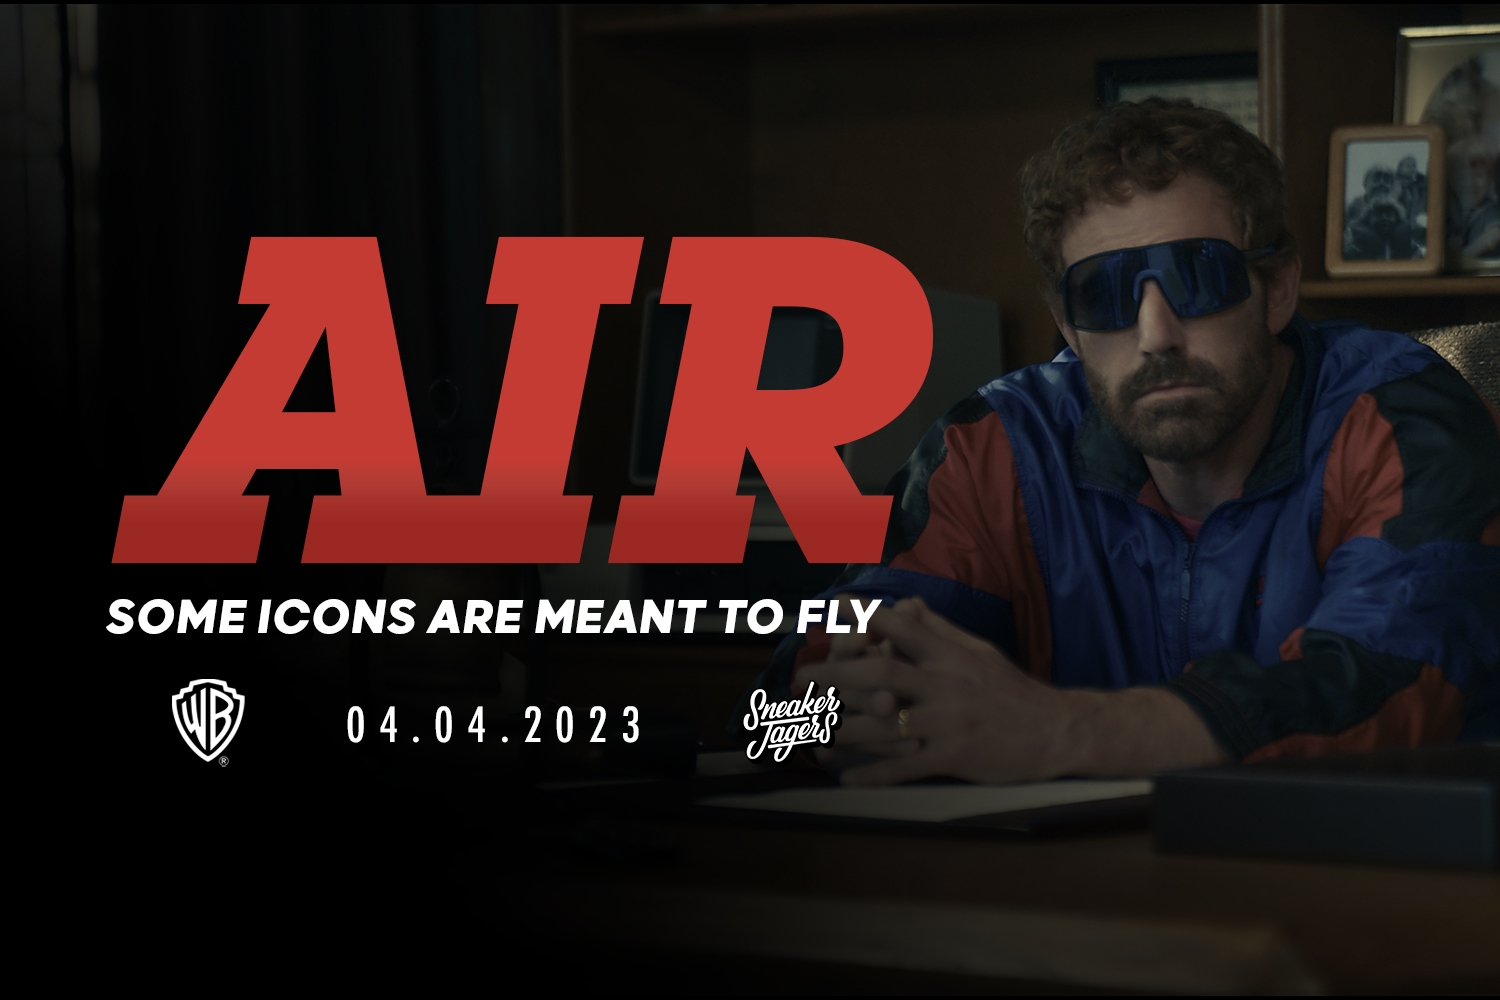 Sneakerjagers comes up with special giveaway around release 'AIR' movie